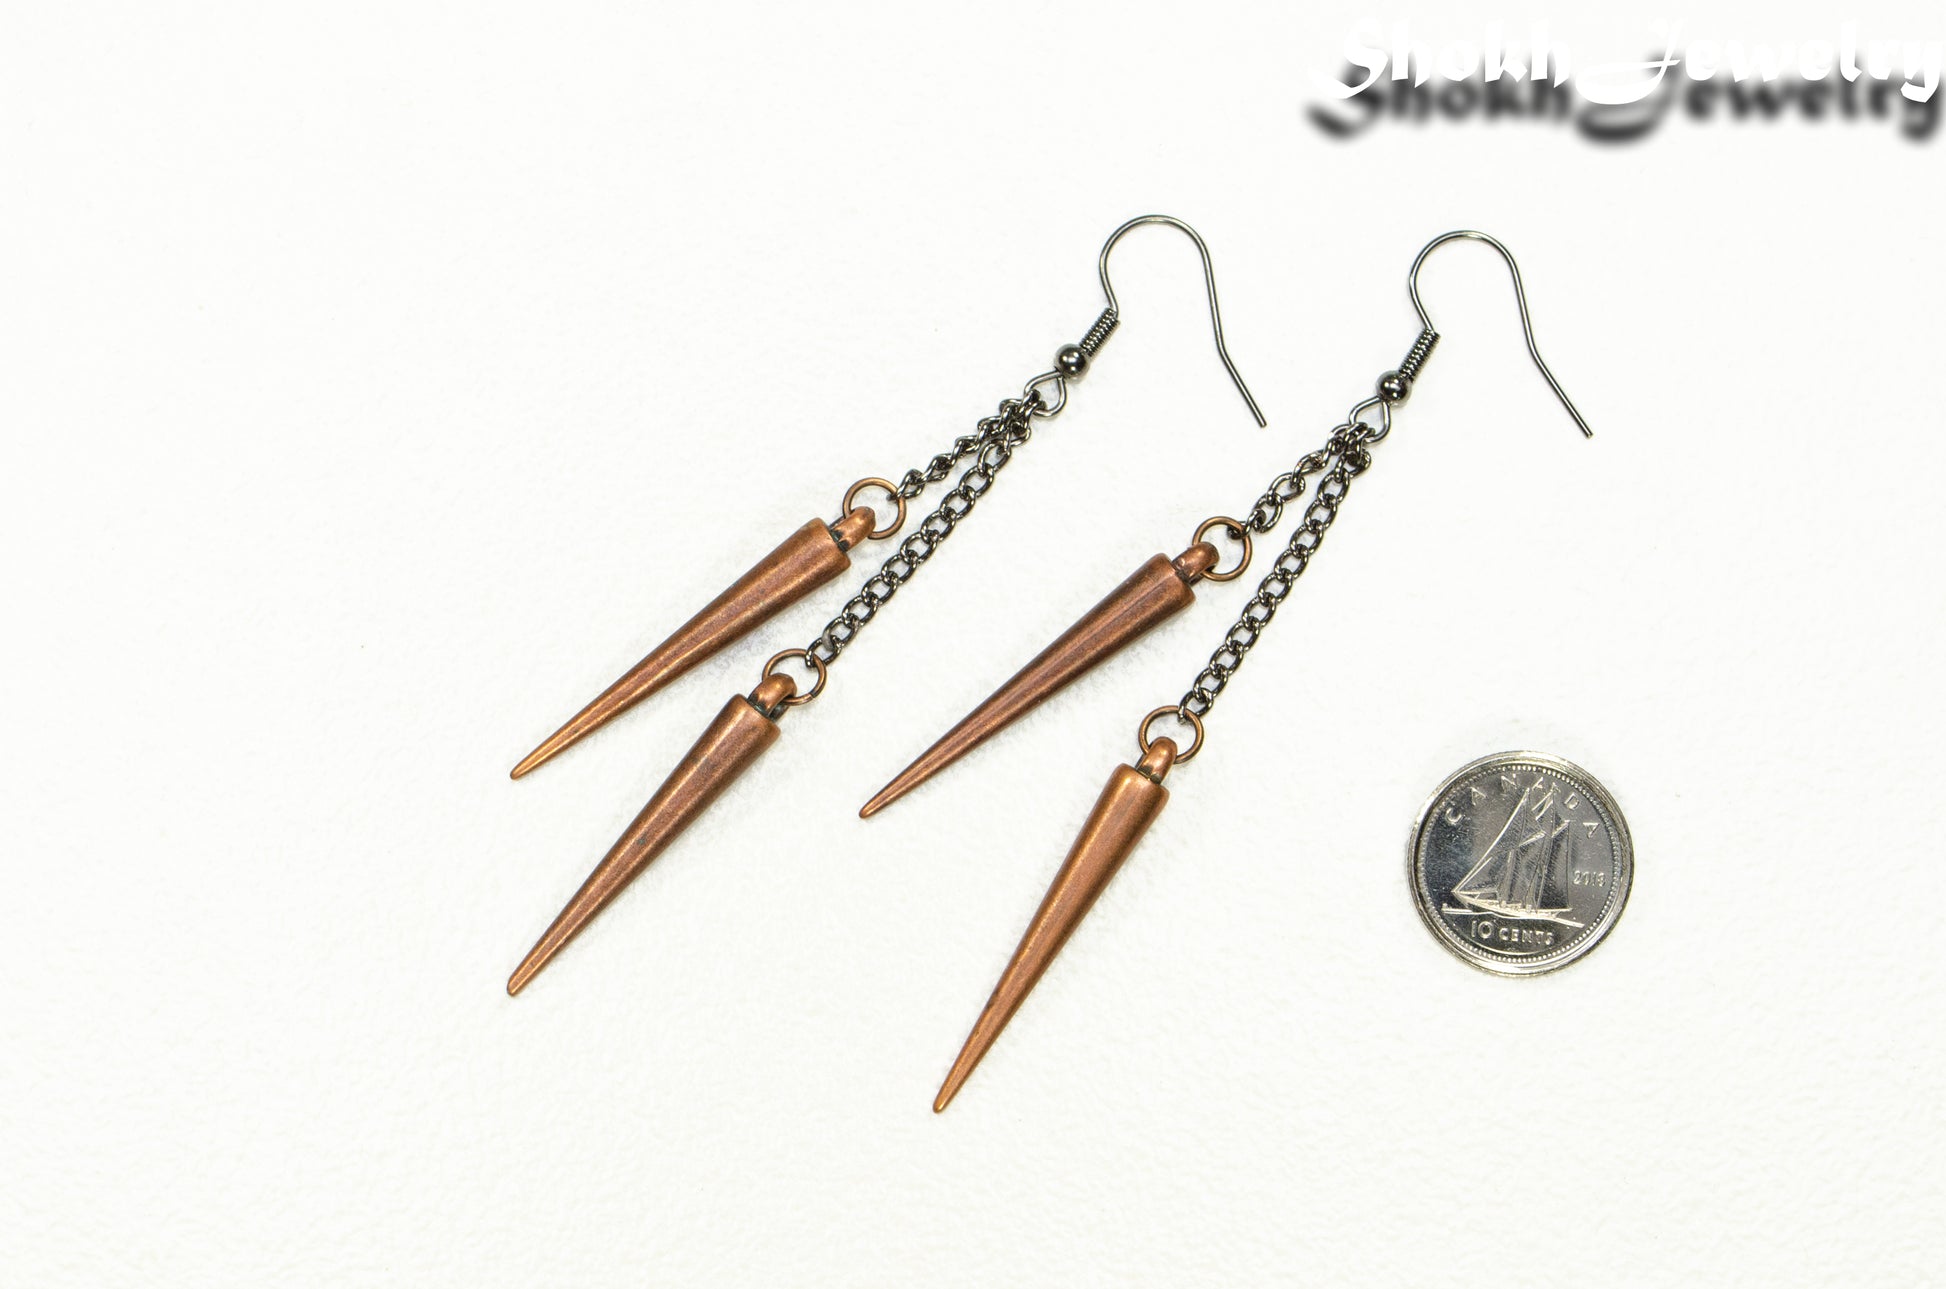 Long chain and antique copper spike earrings beside a dime.